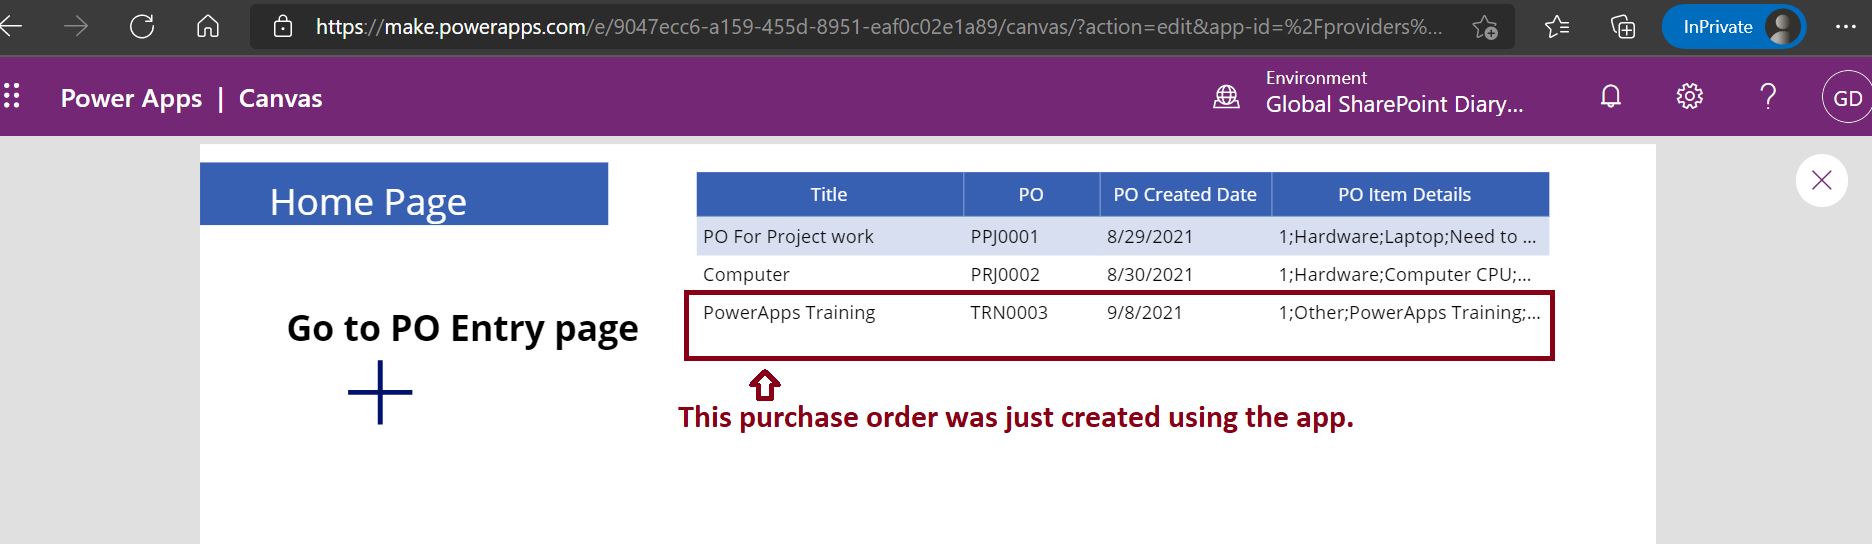 PowerApps repeating section SharePoint datatable